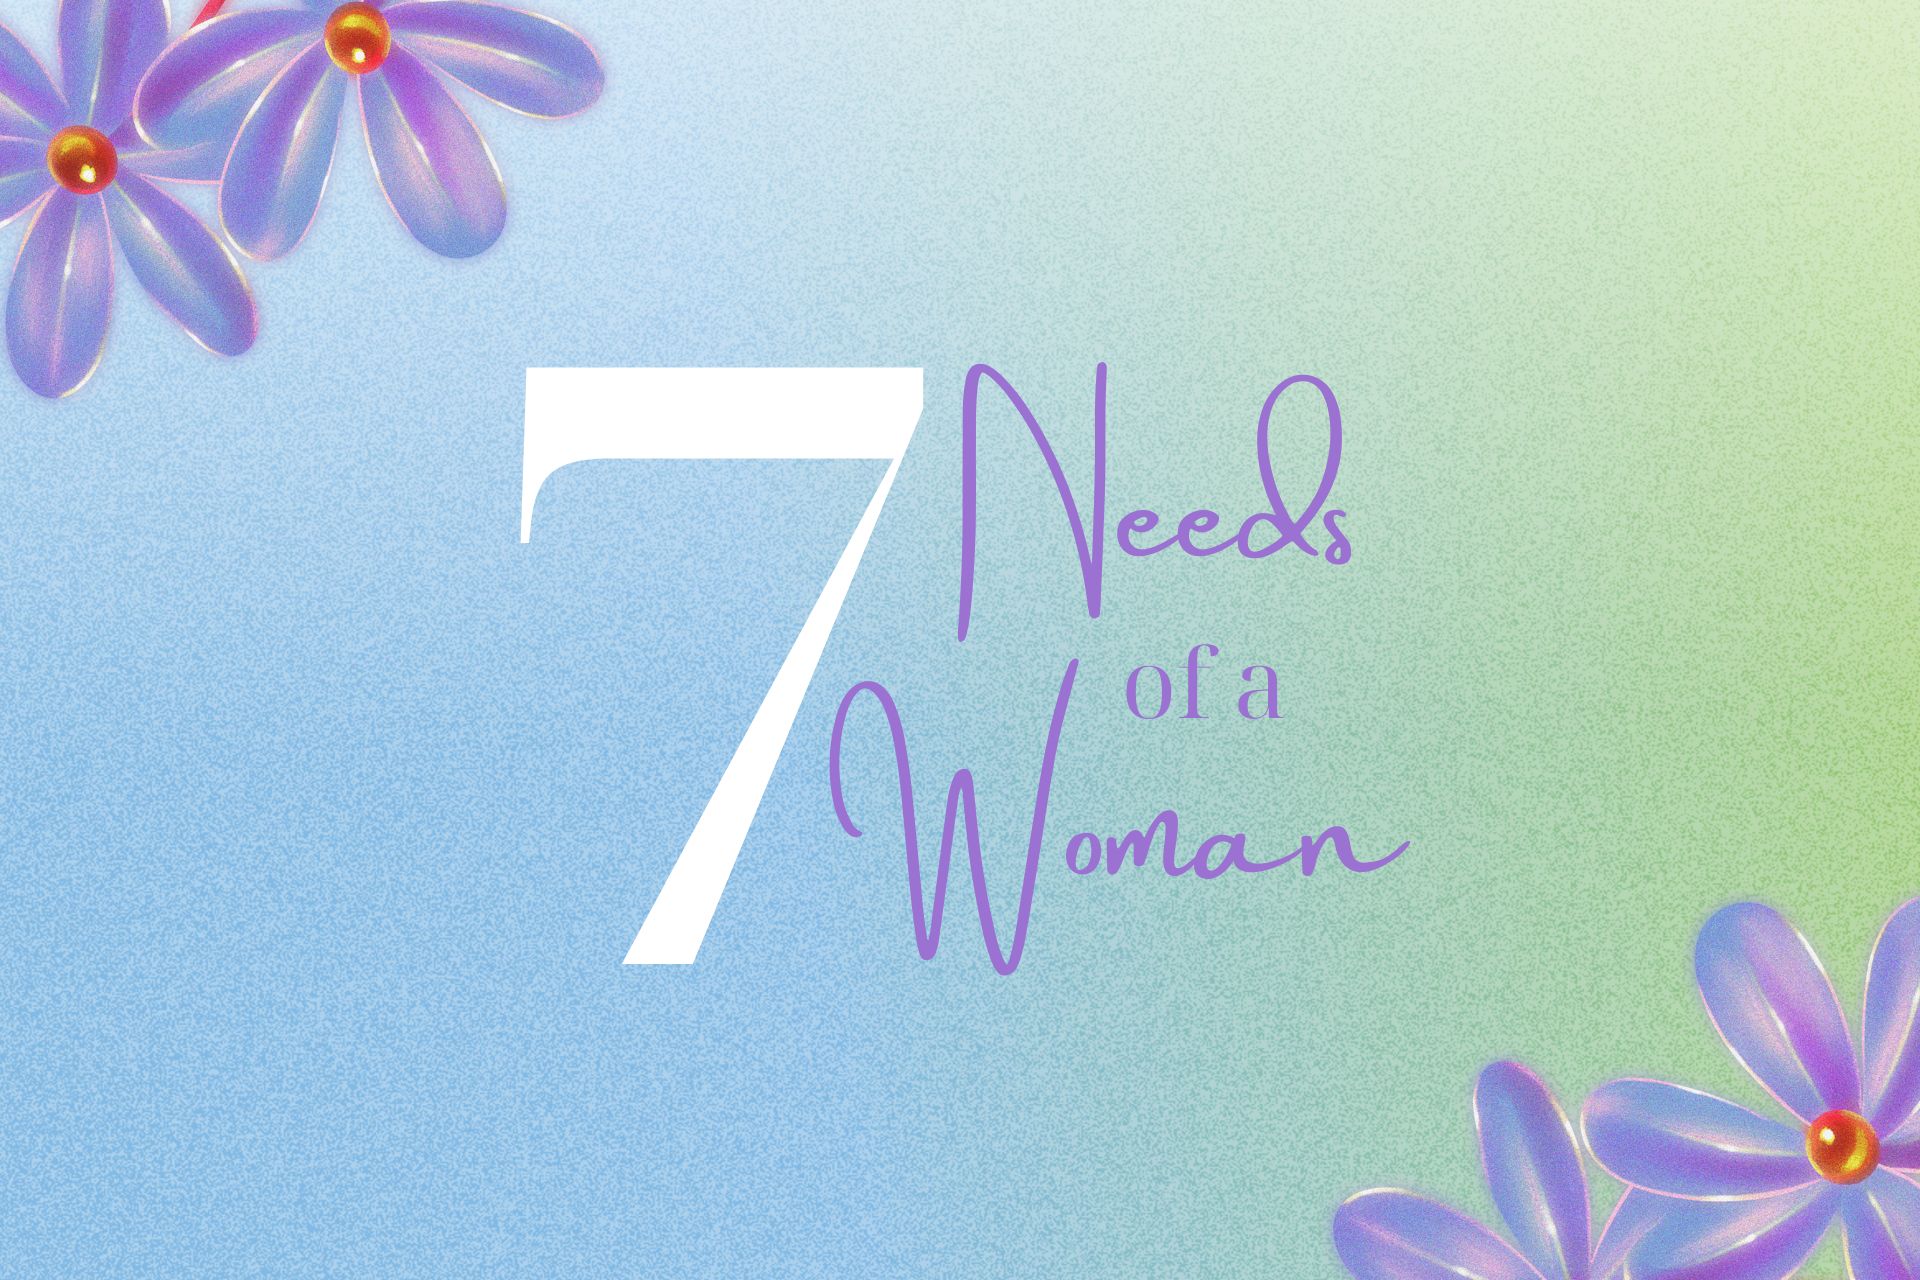 7 Needs of a Woman